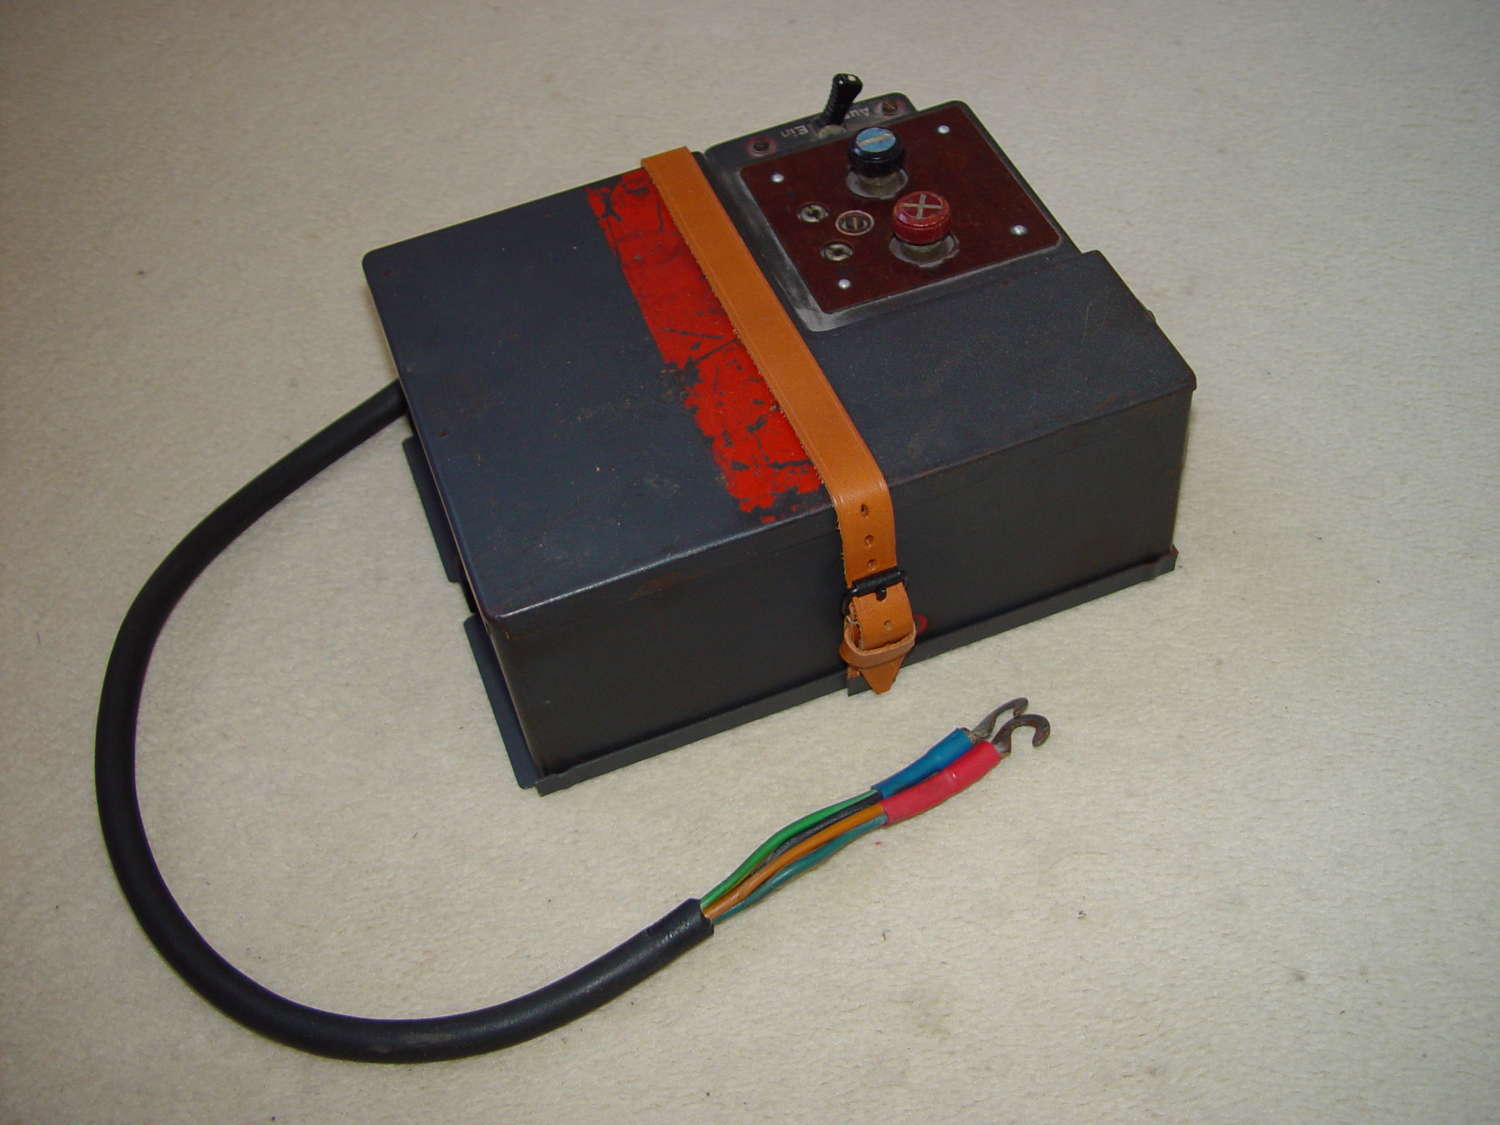 Wehrmacht E.W.b power supply for Torn.E.b receiver